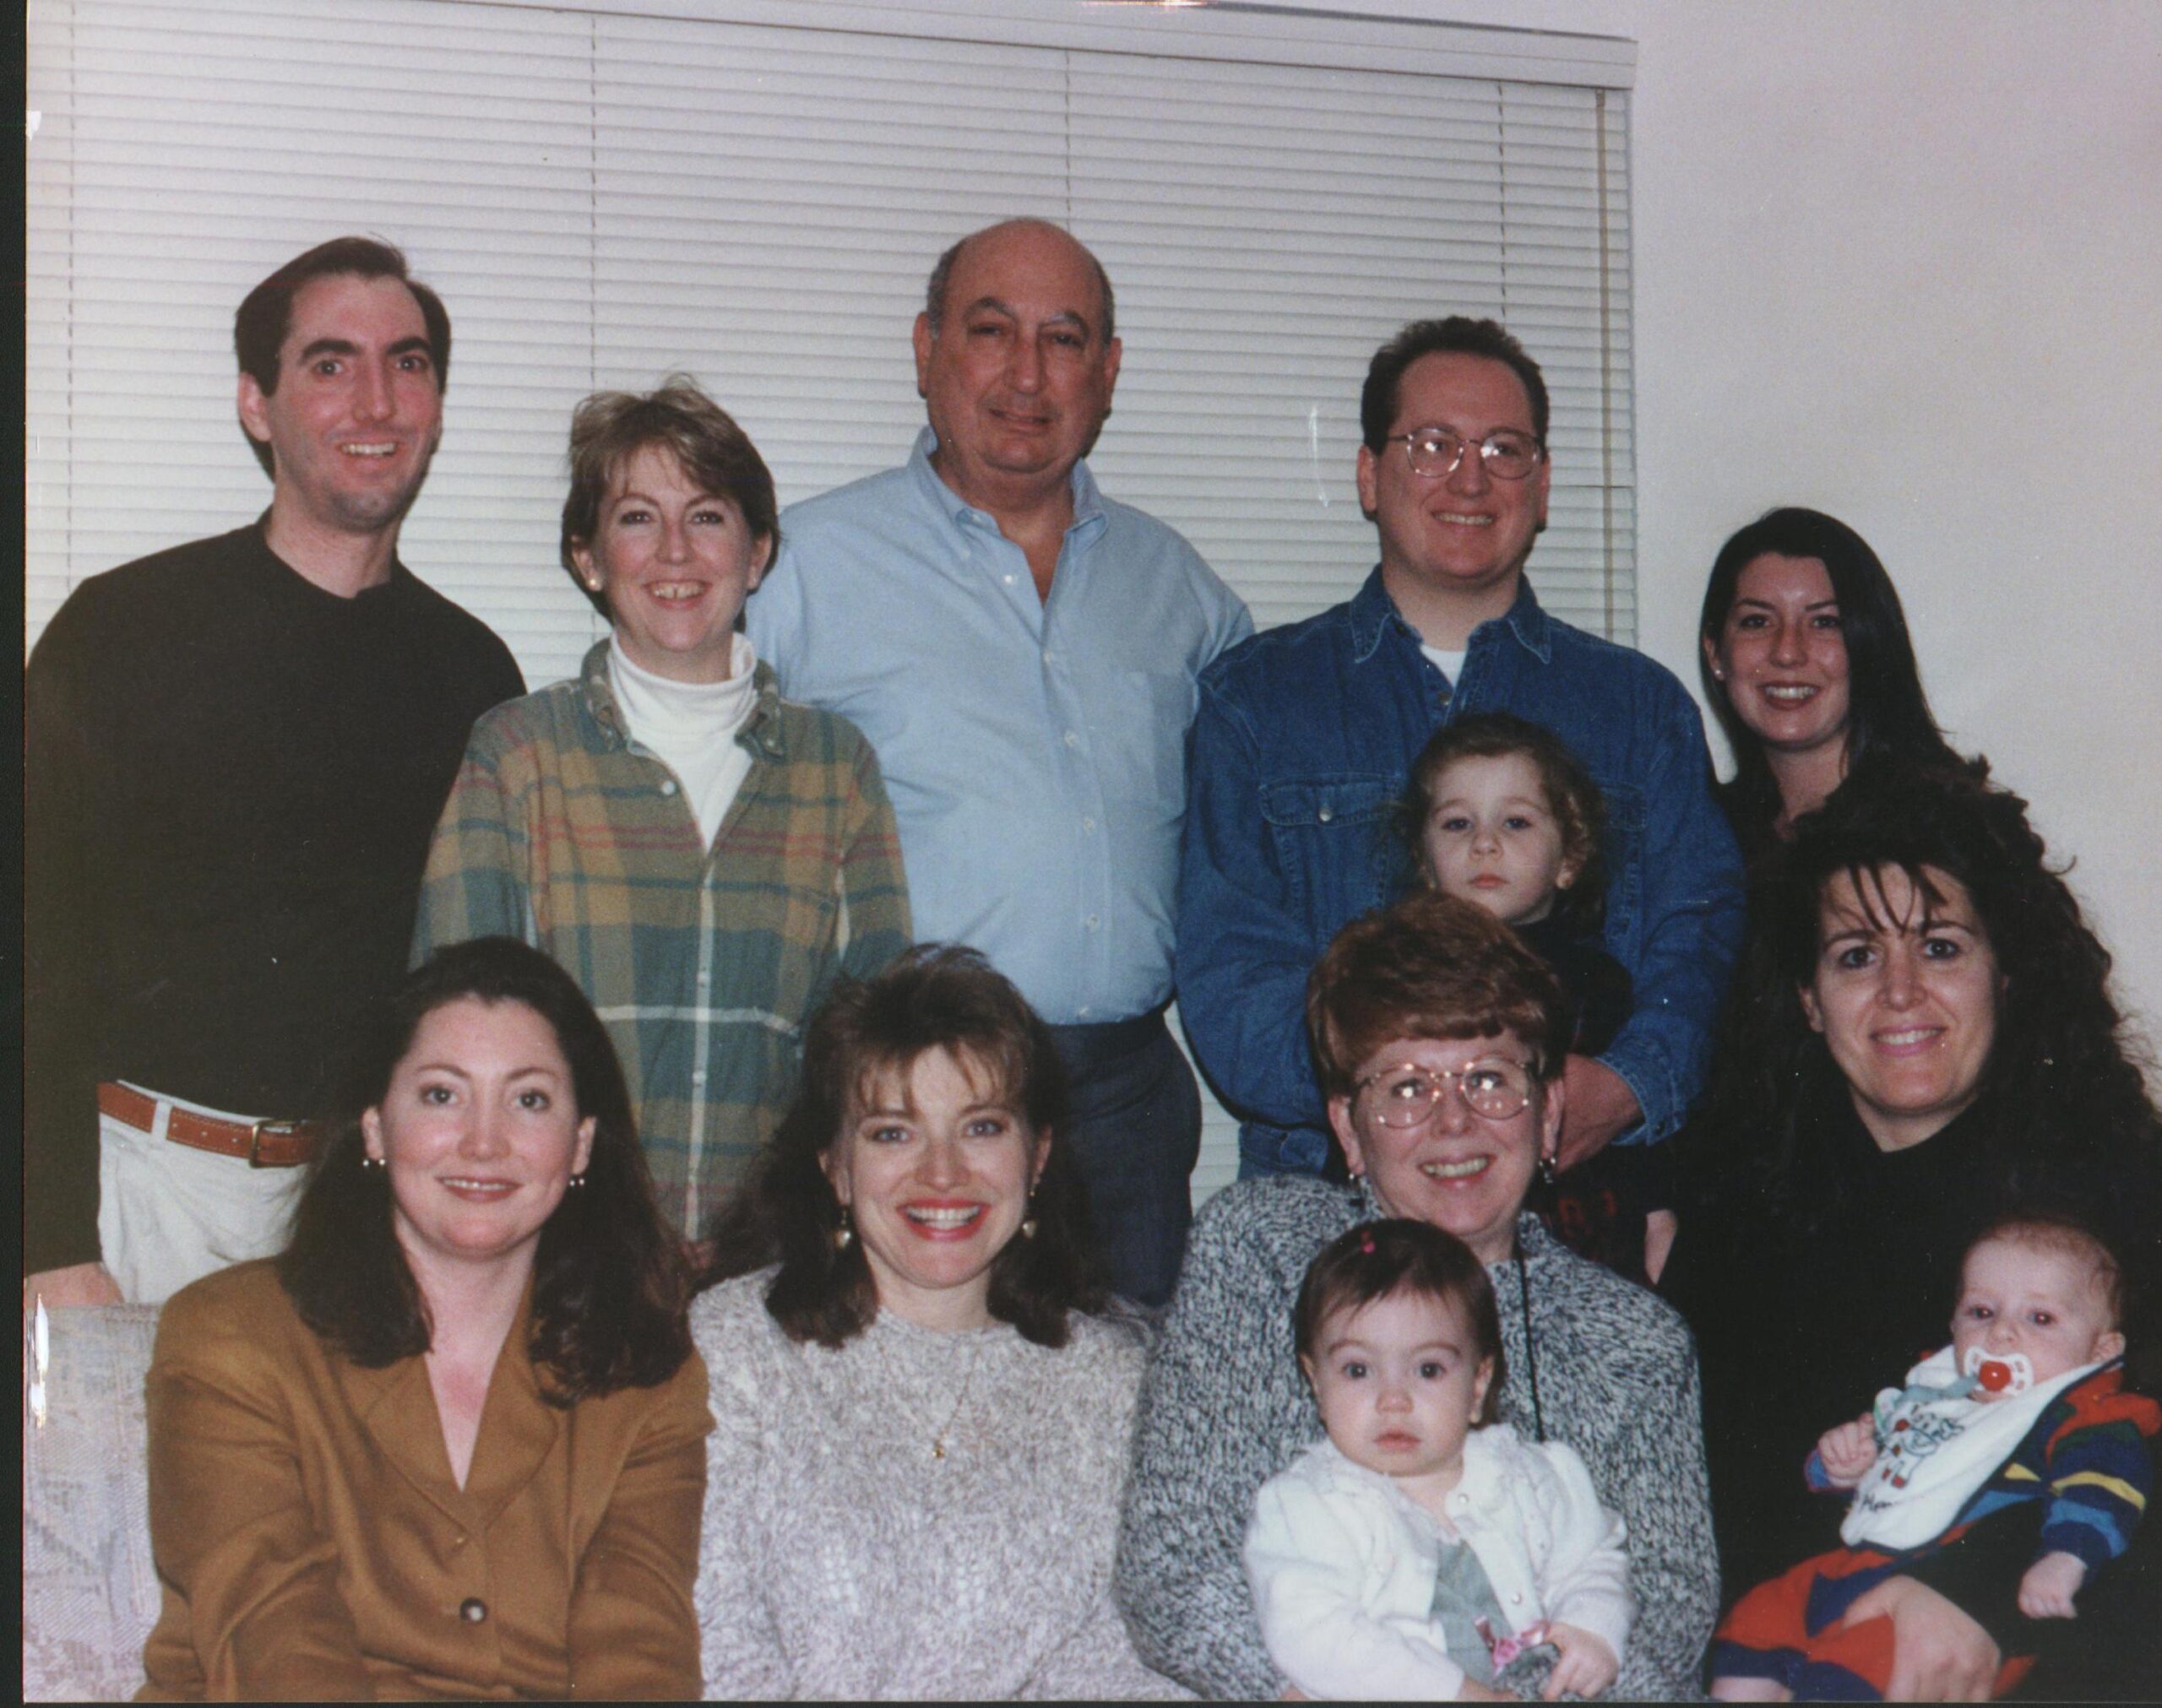 Another-Squillace-family-picture-w-Dad-Mom-Lori-SteveNedal-Sisters-scaled